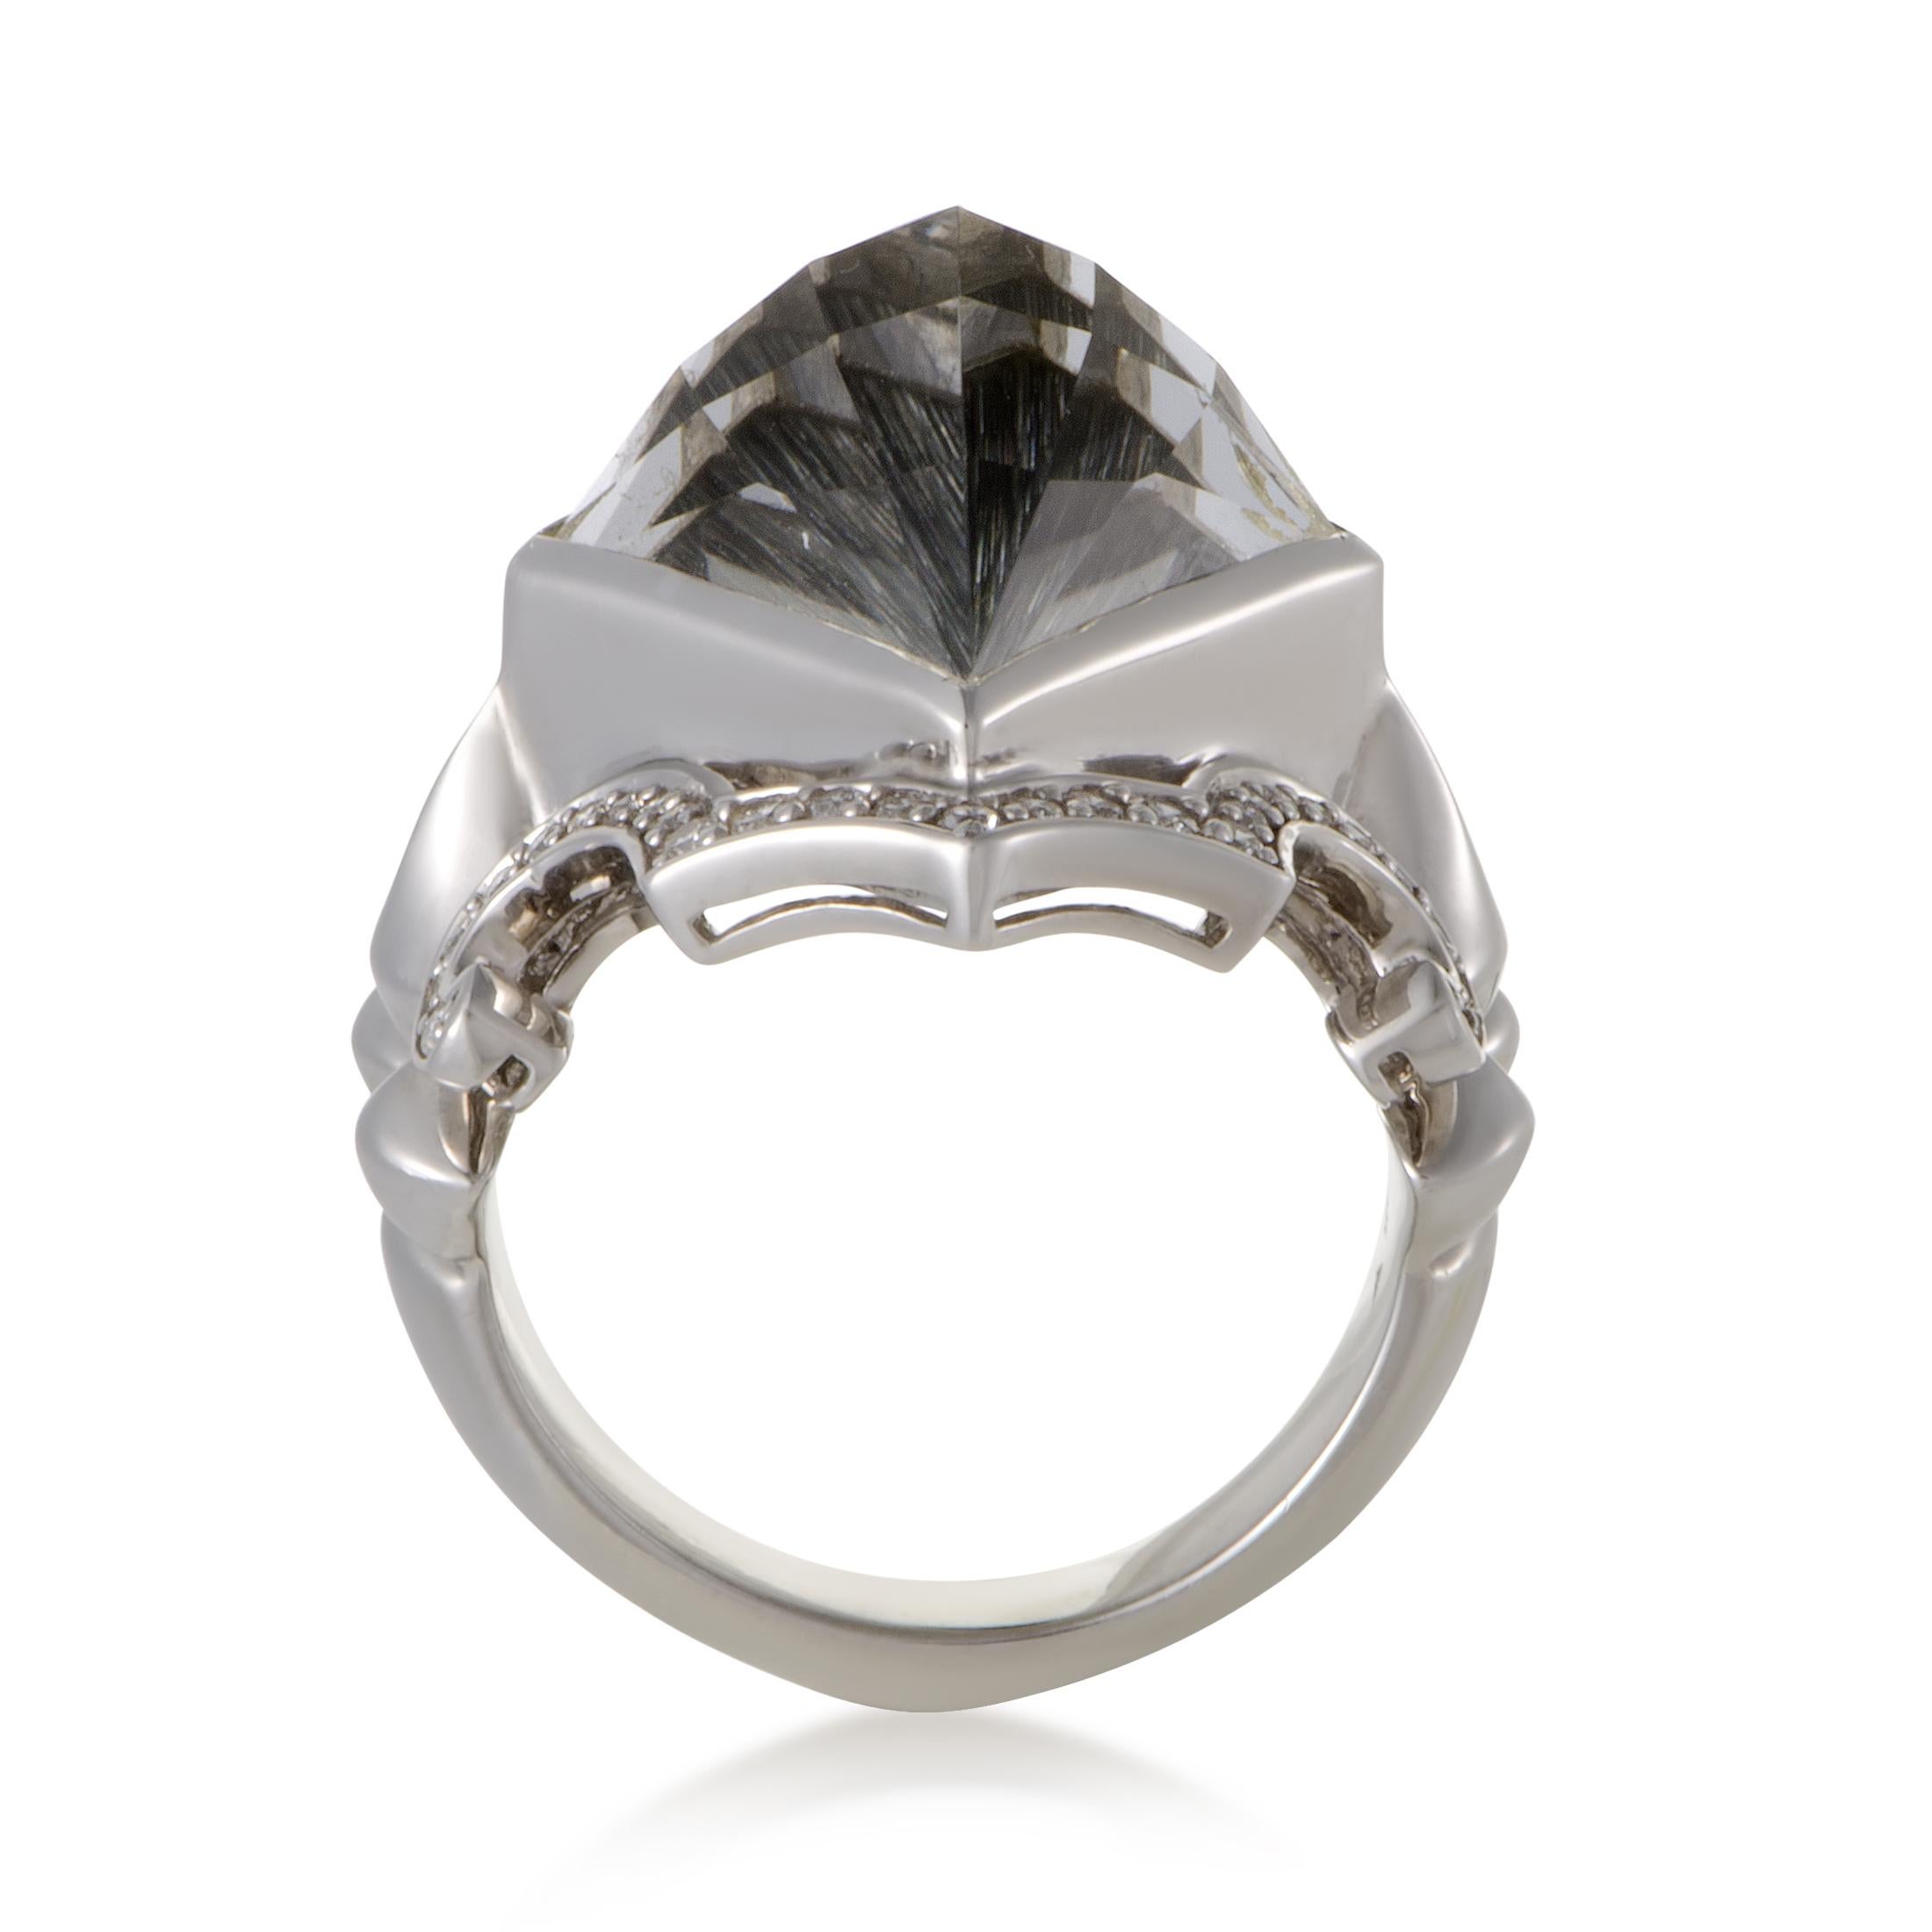 The exquisitely offbeat design of this ring combined with an incredibly captivating gemstone décor create an exceptional aesthetic effect in this ring. The ring is expertly crafted from white rhodium-plated silver, and set with eye-catching cat’s